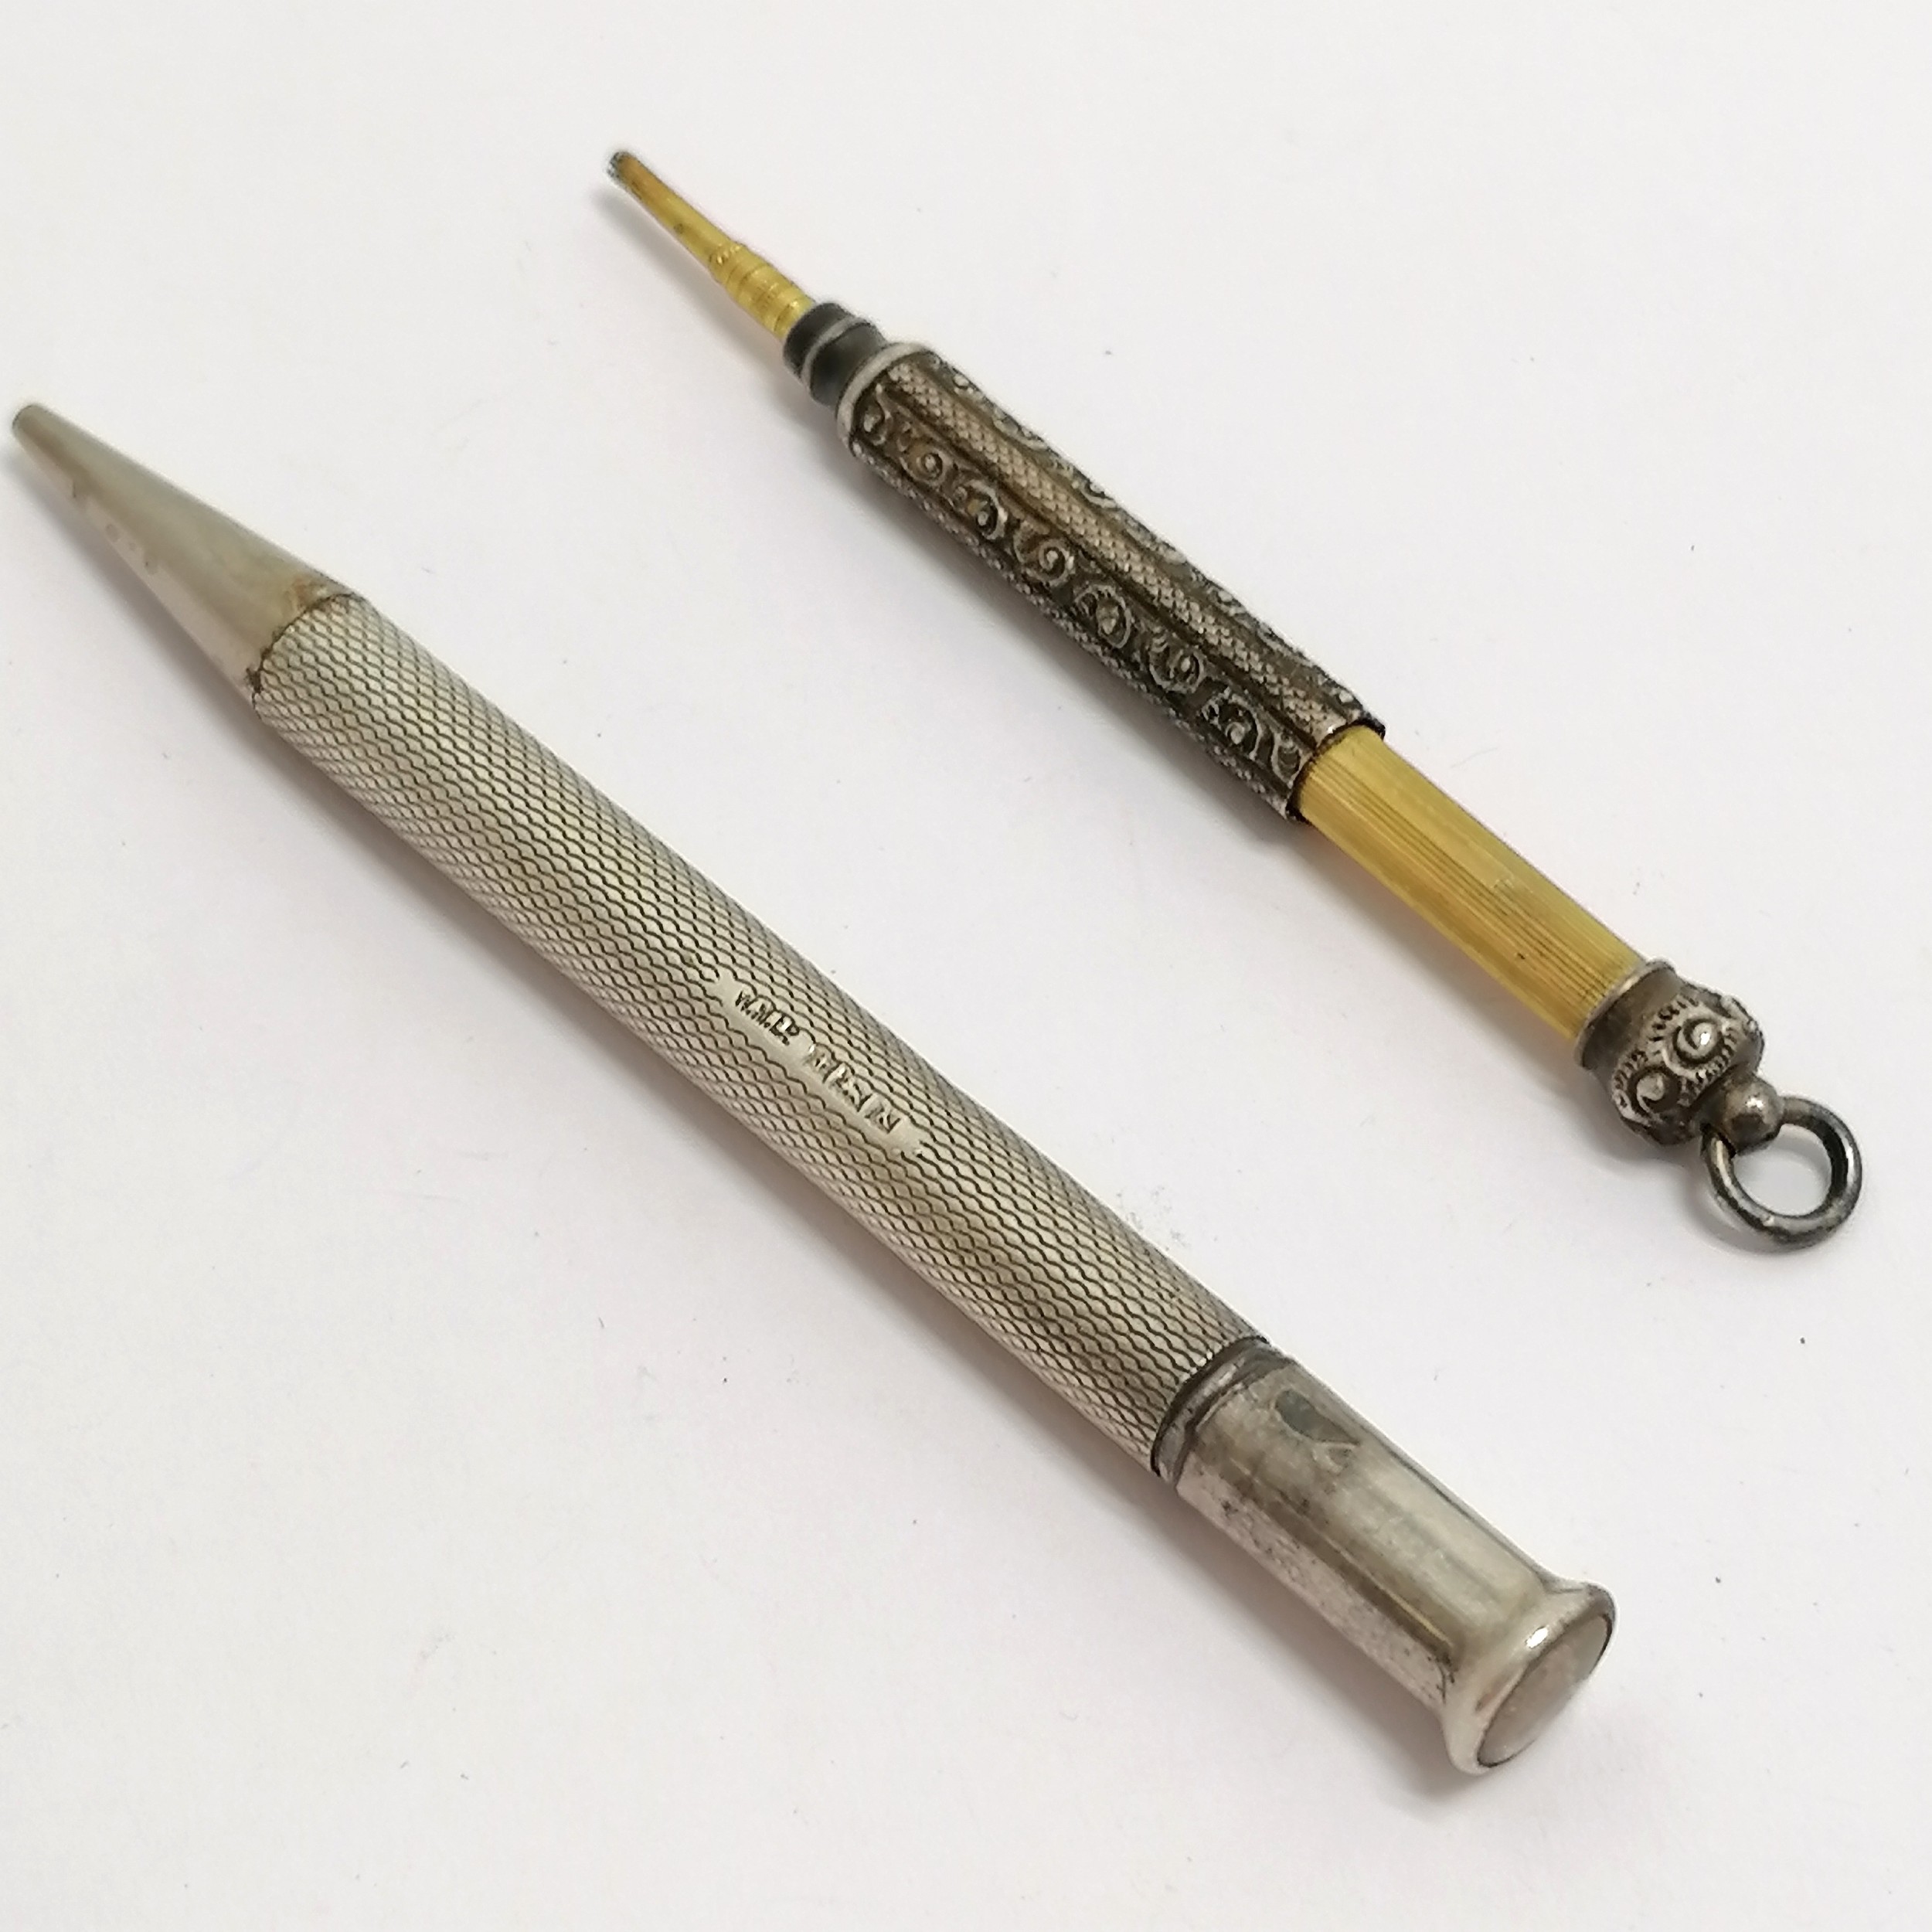 W S Hicks New York unmarked silver propelling pencil (8.5cm) t/w W M Ltd silver propelling pencil ( - Image 2 of 2